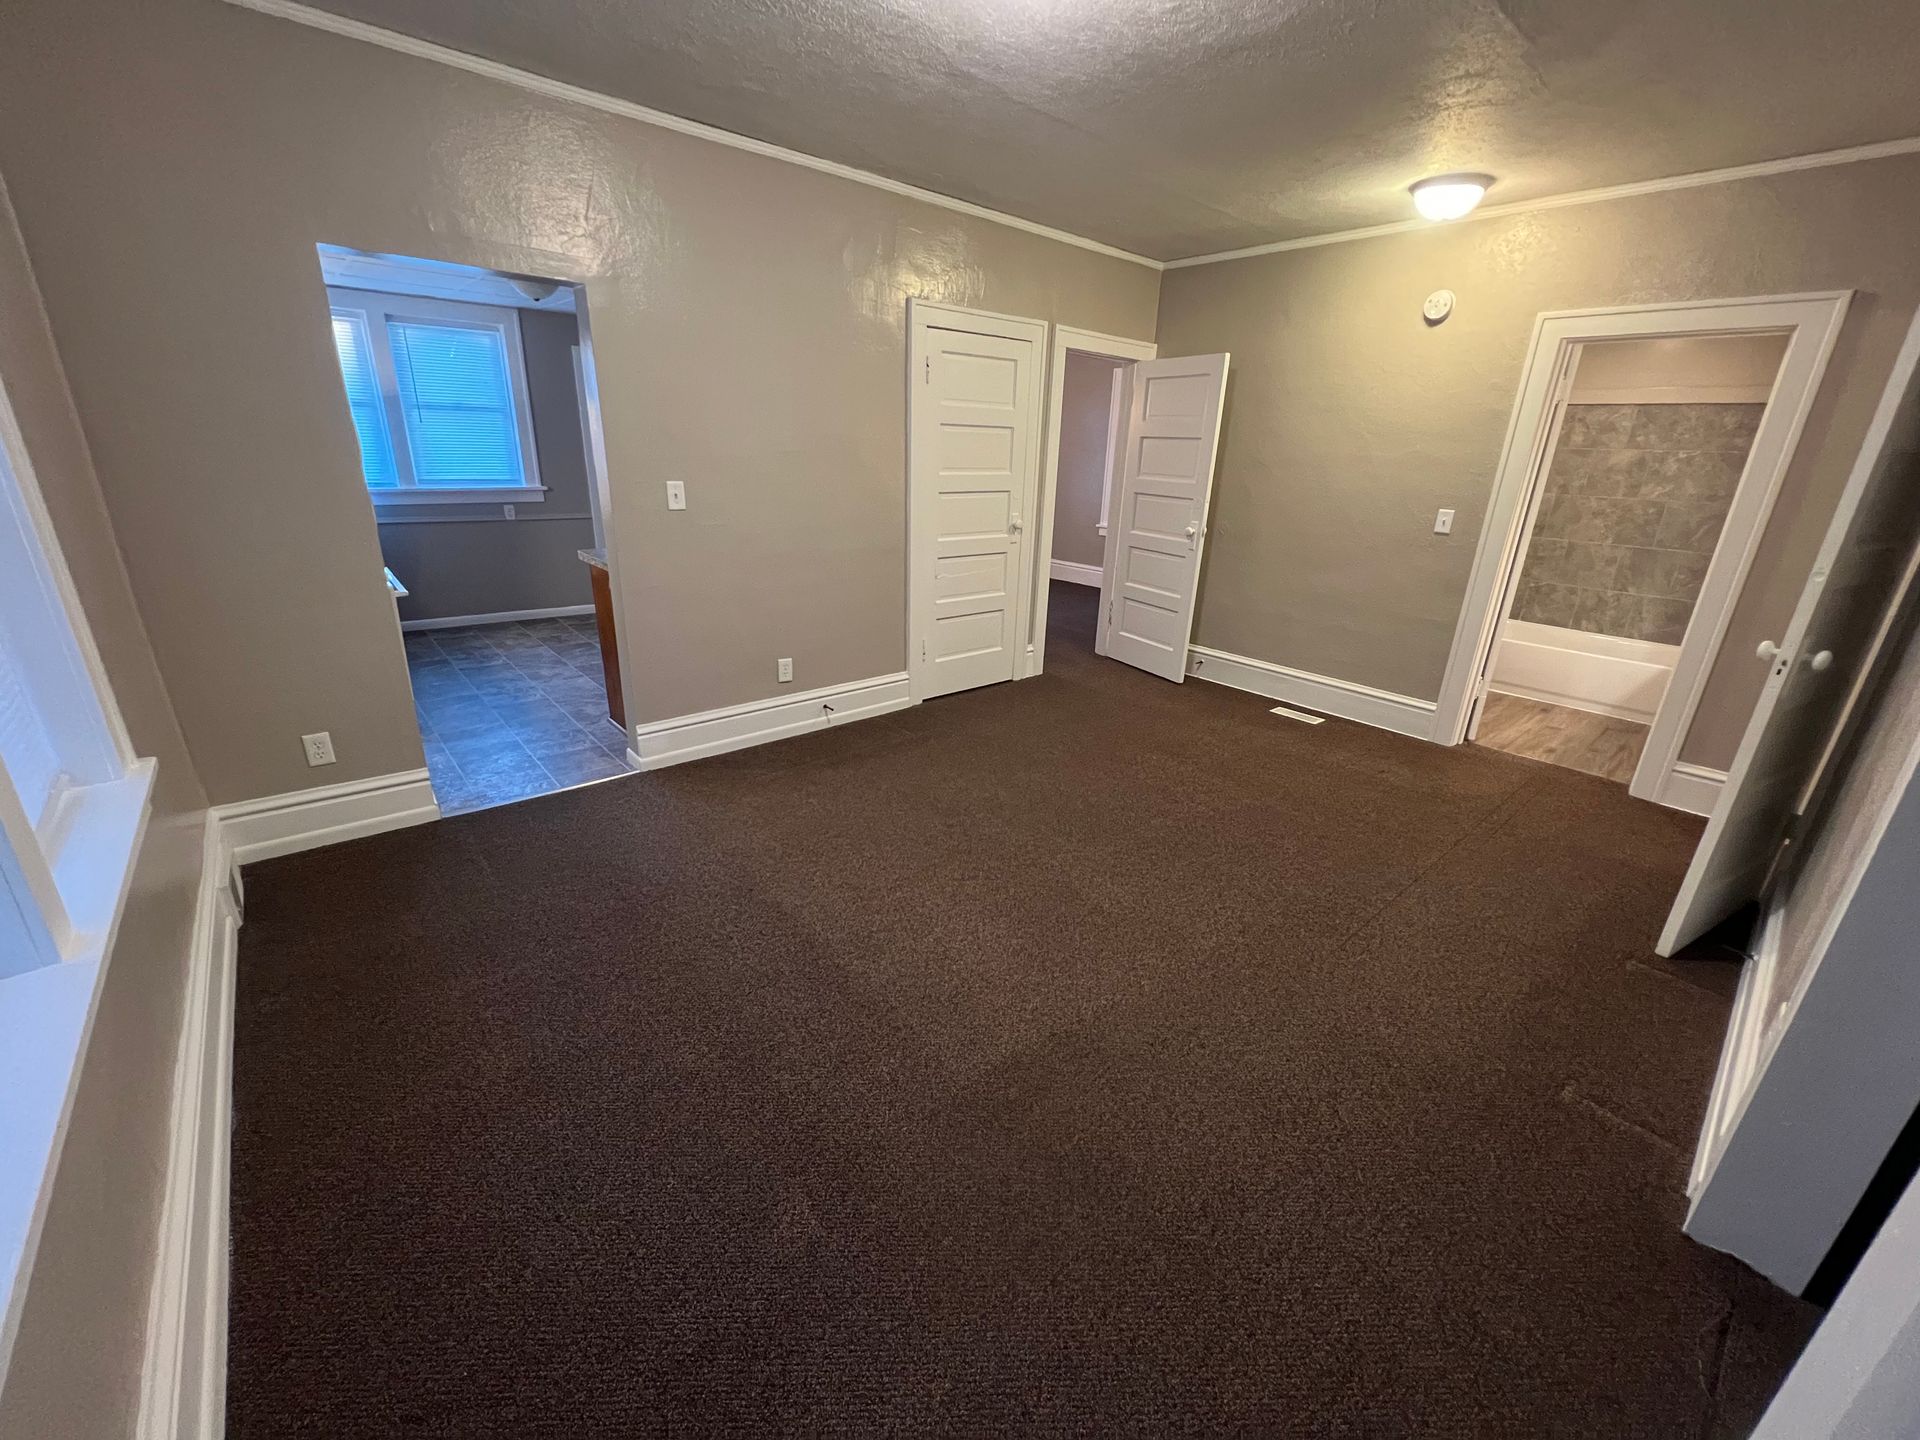 An empty living room with a brown carpet and gray walls.